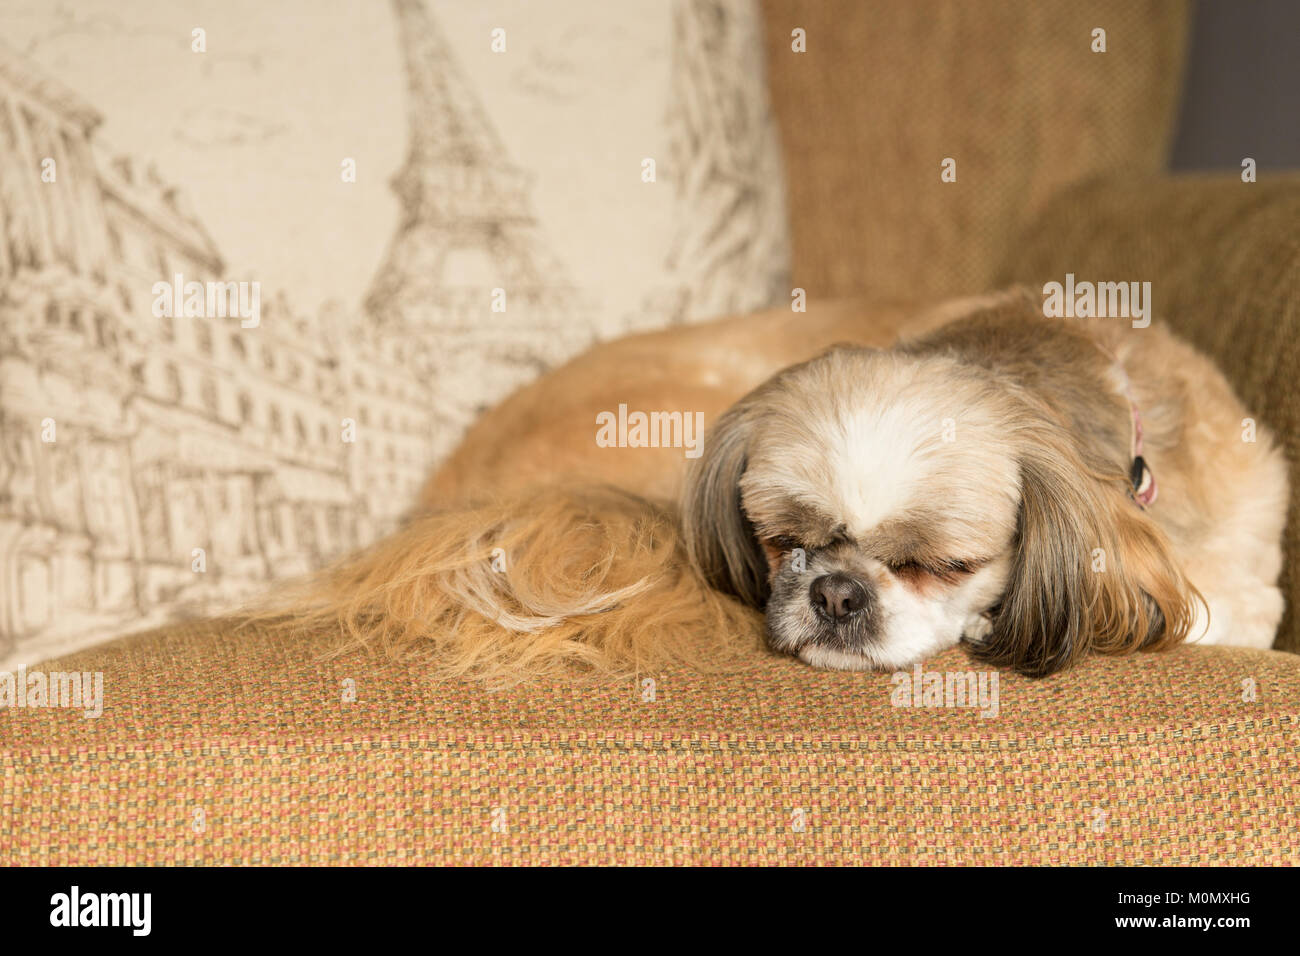 A small dog sleeping on a chair Stock Photo